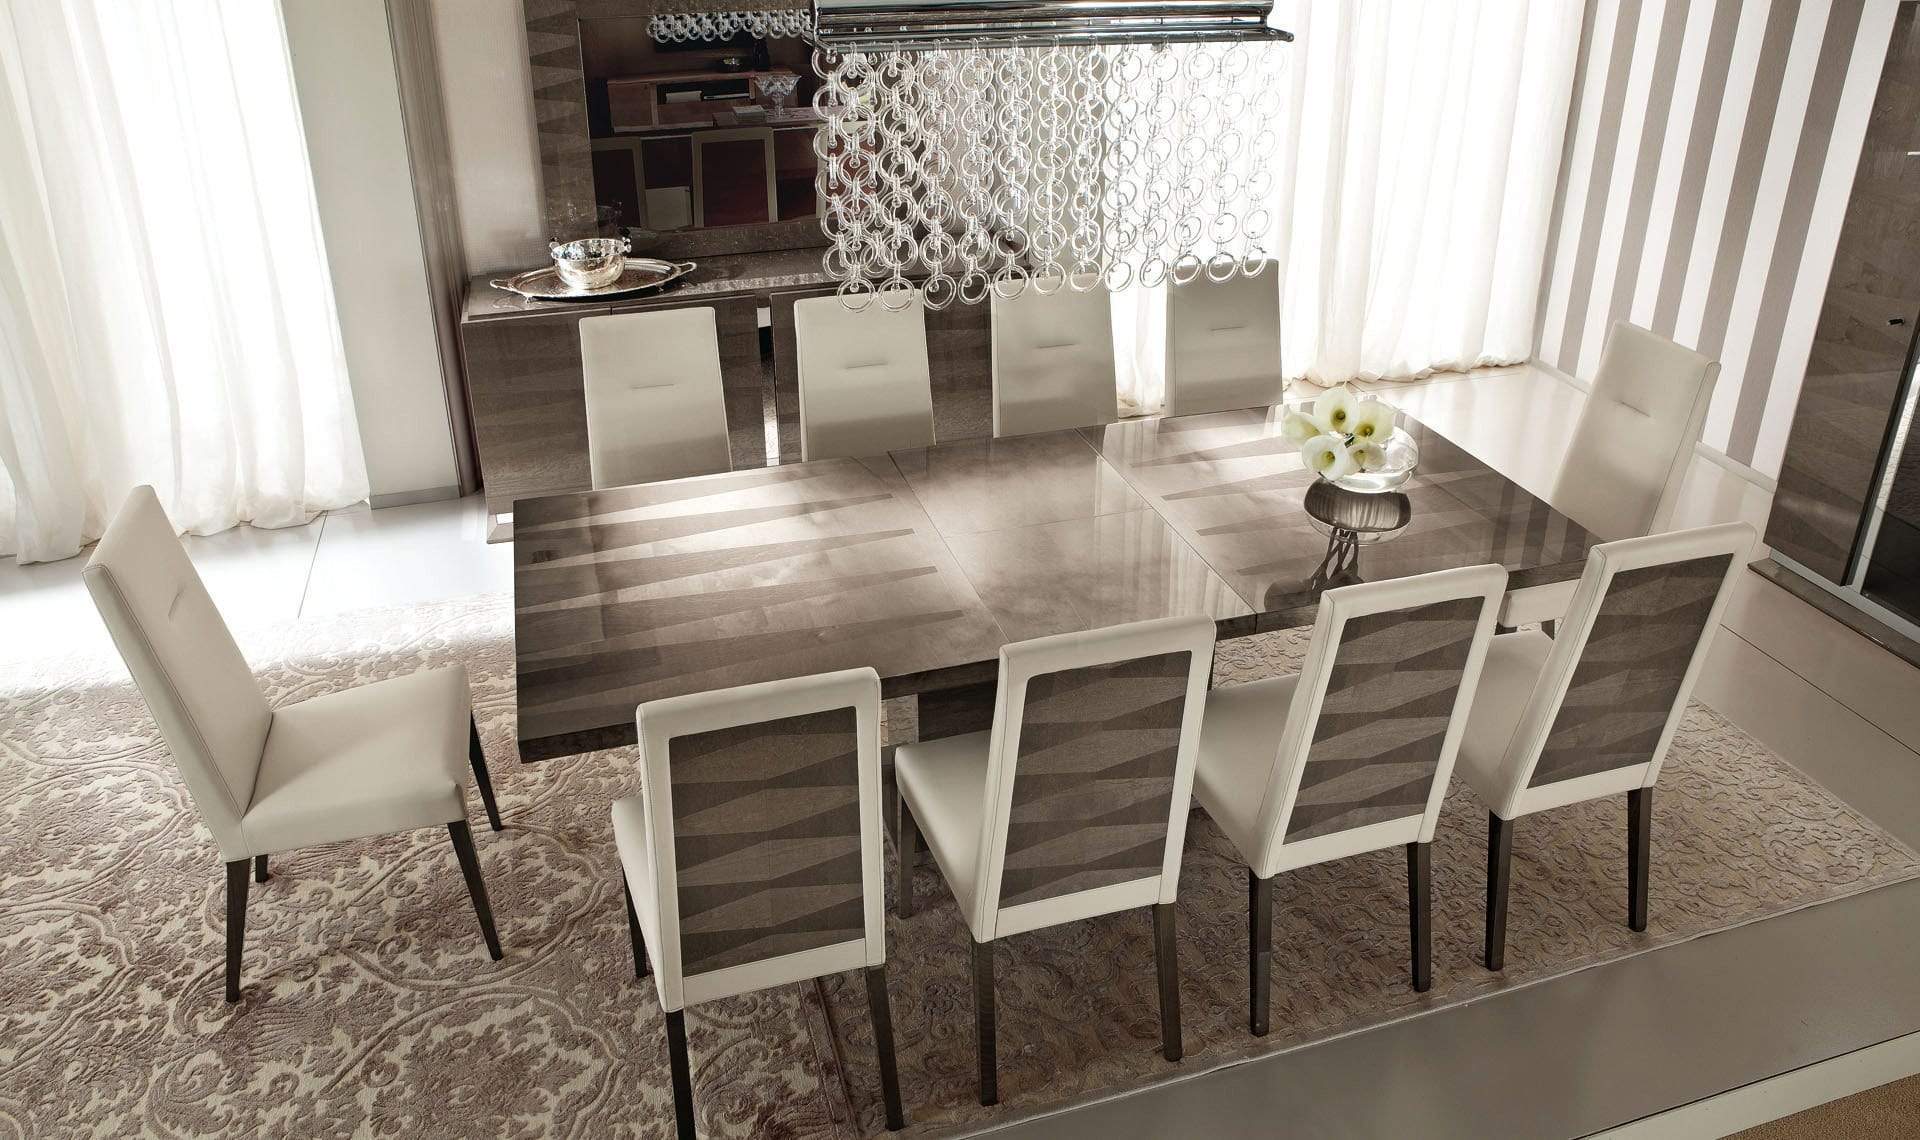 Alf Italia Dining Sets Monaco Dining Room Collection